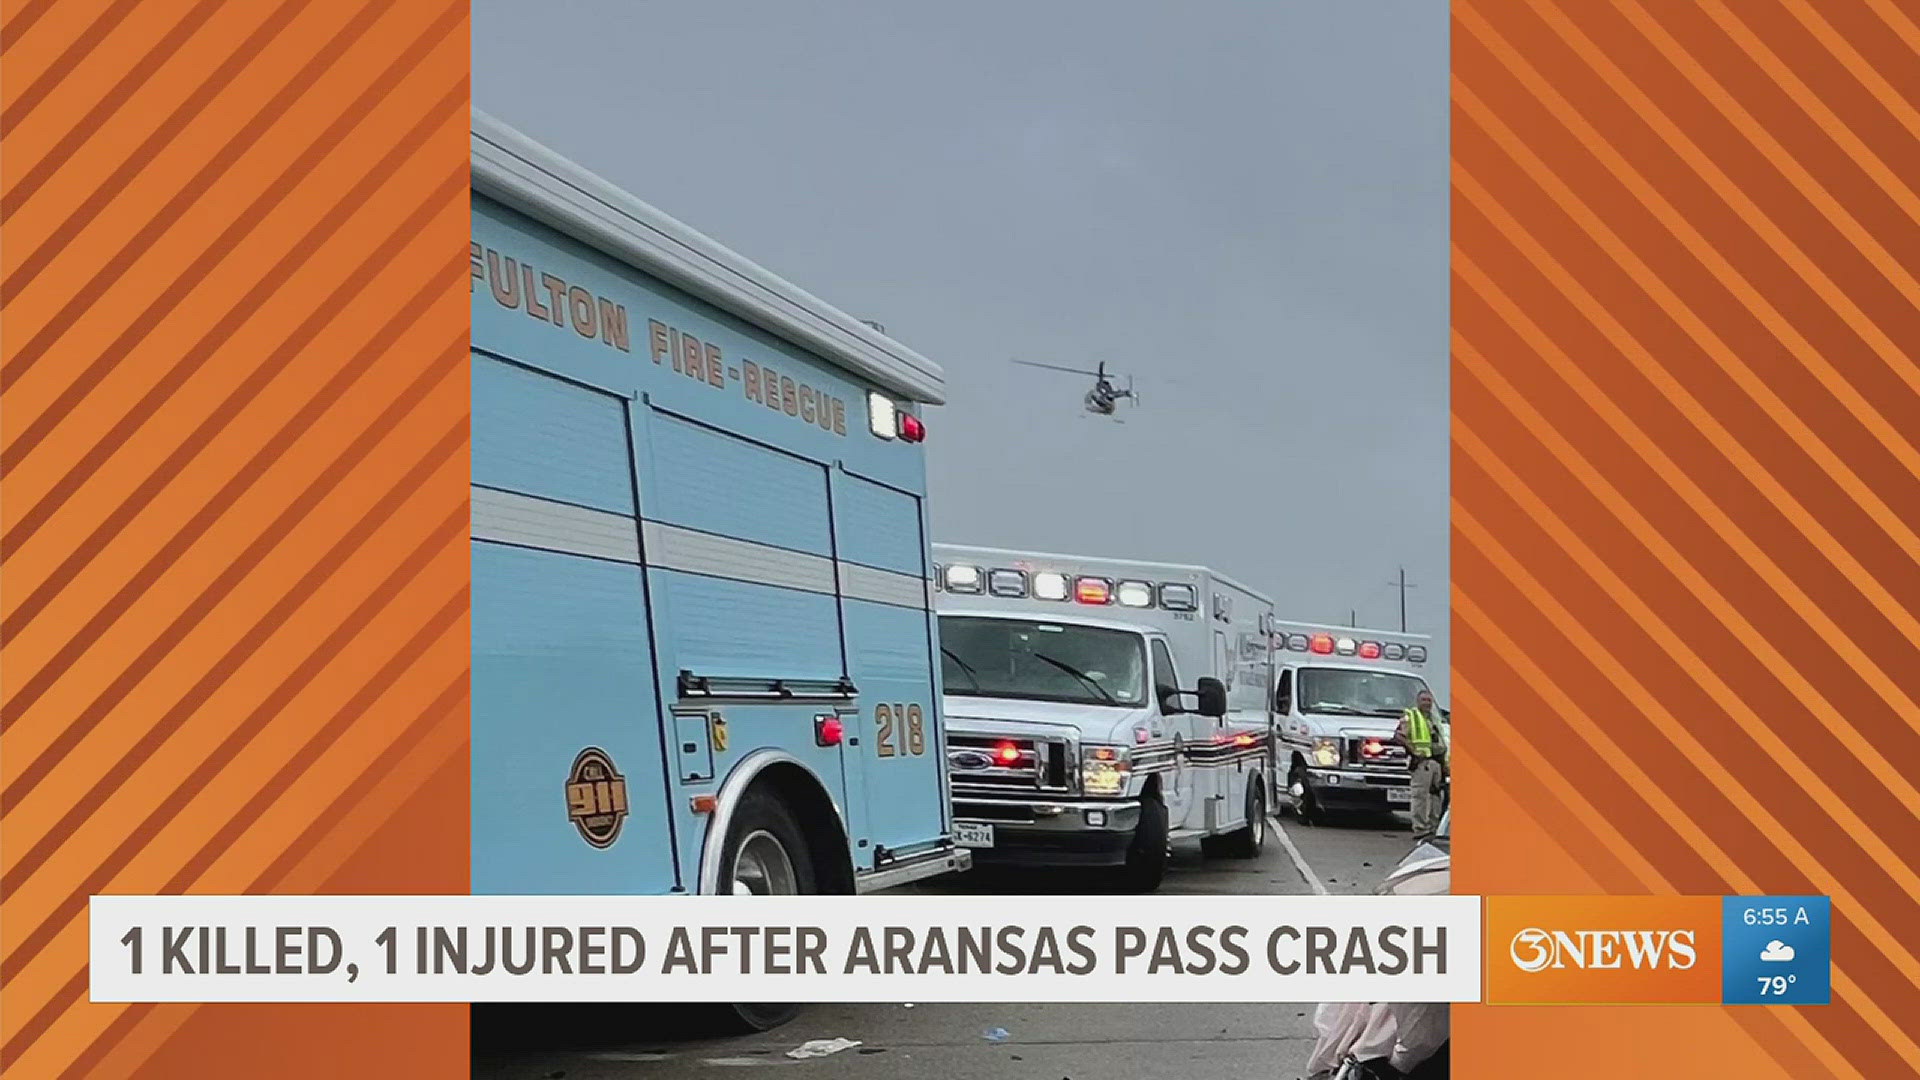 A 76-year-old man from Louisiana remains in critical condition after their vehicle hydroplaned and hit a tractor-trailer.